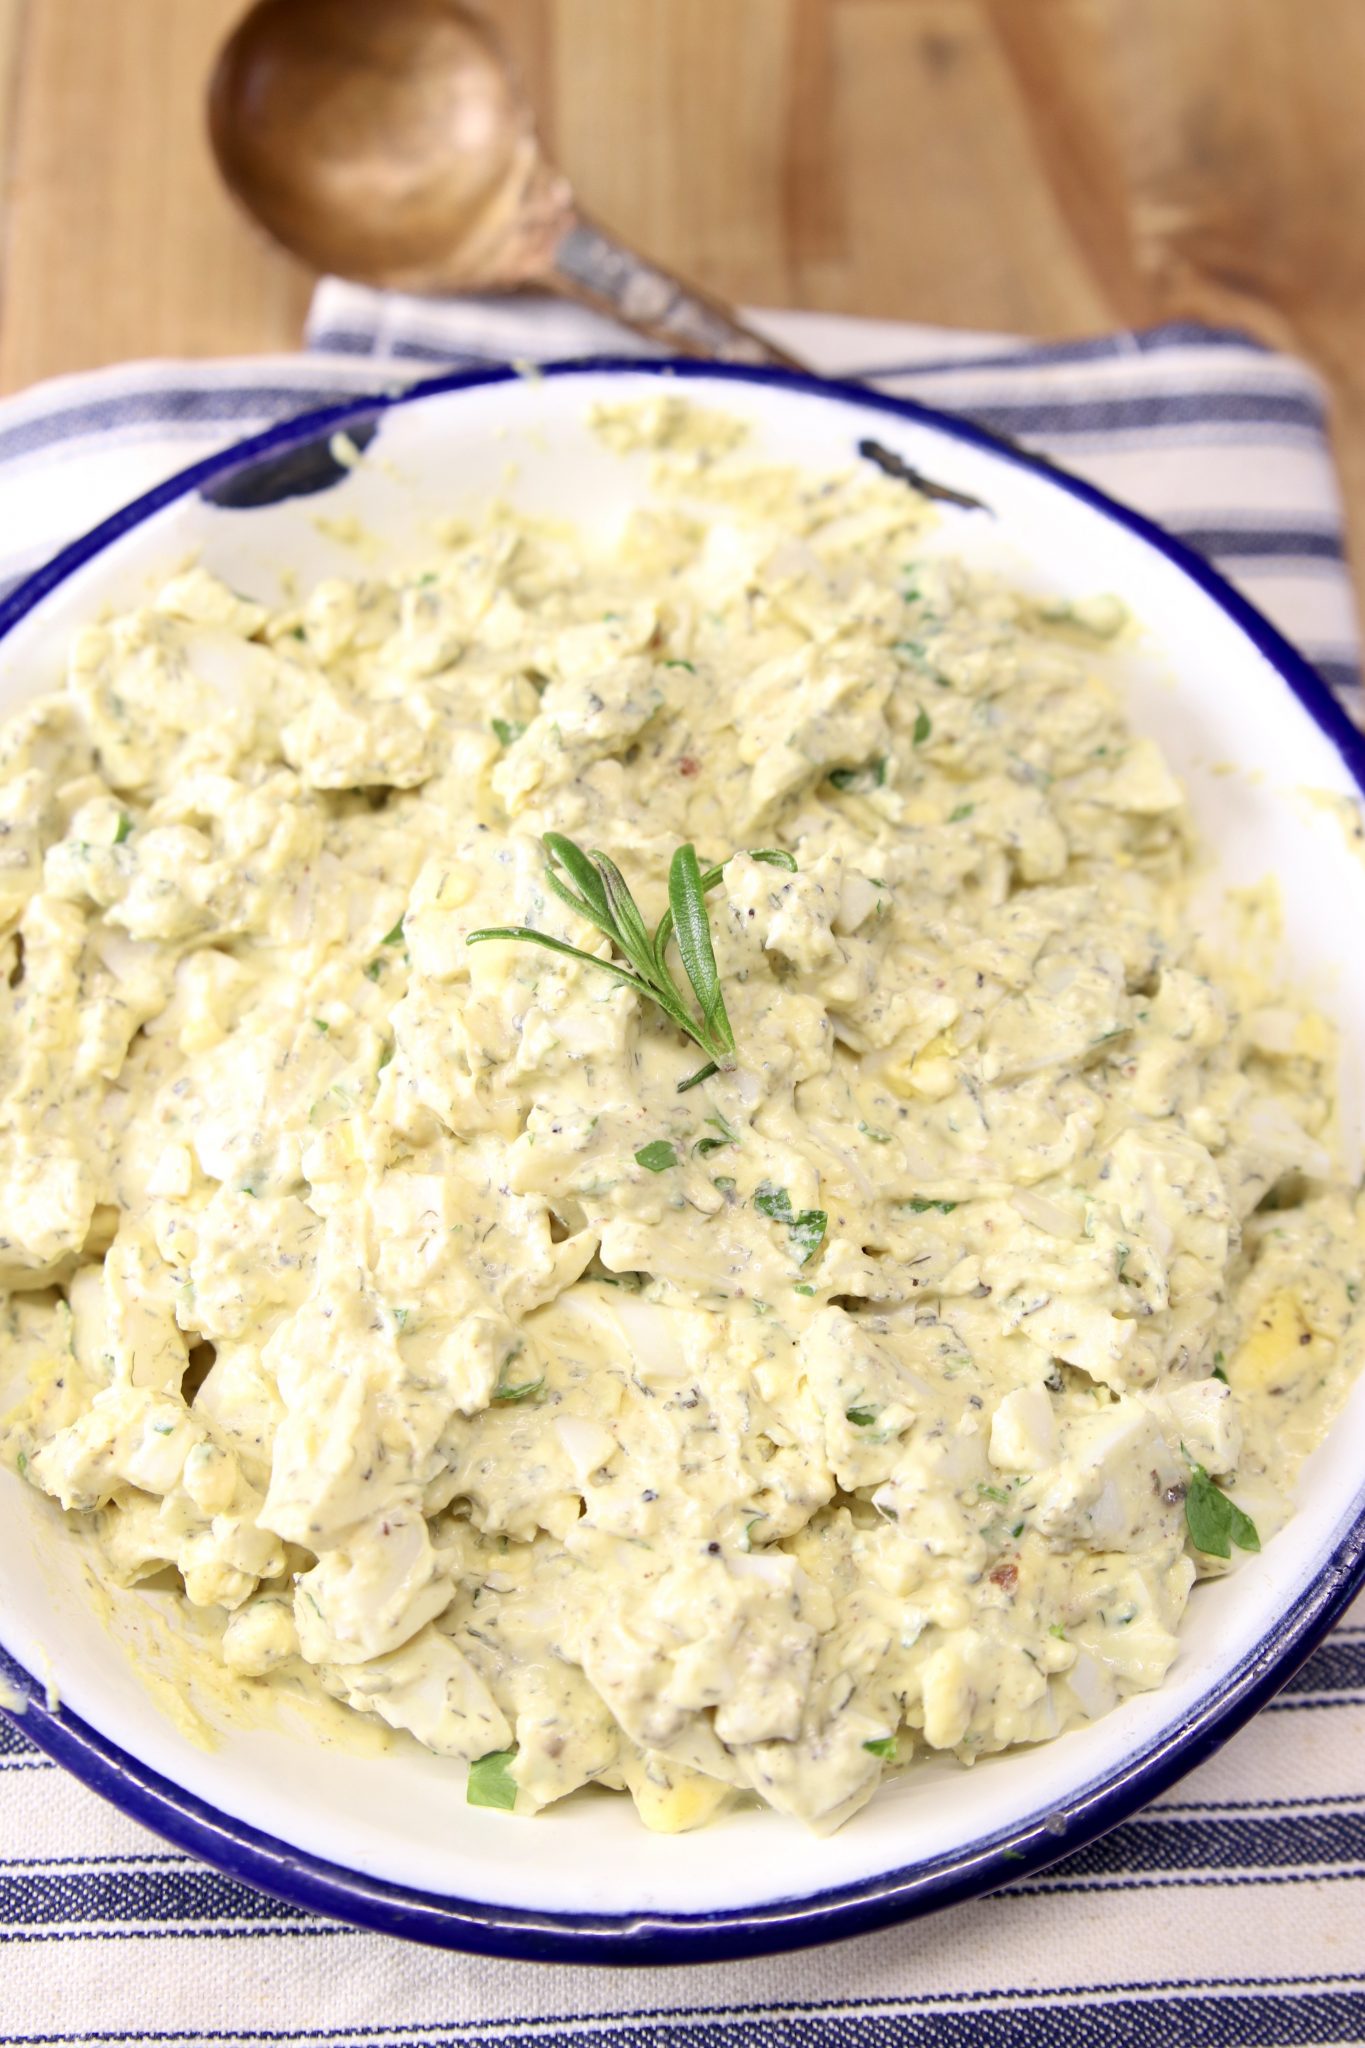 Egg salad in a bowl with sprig of rosemary